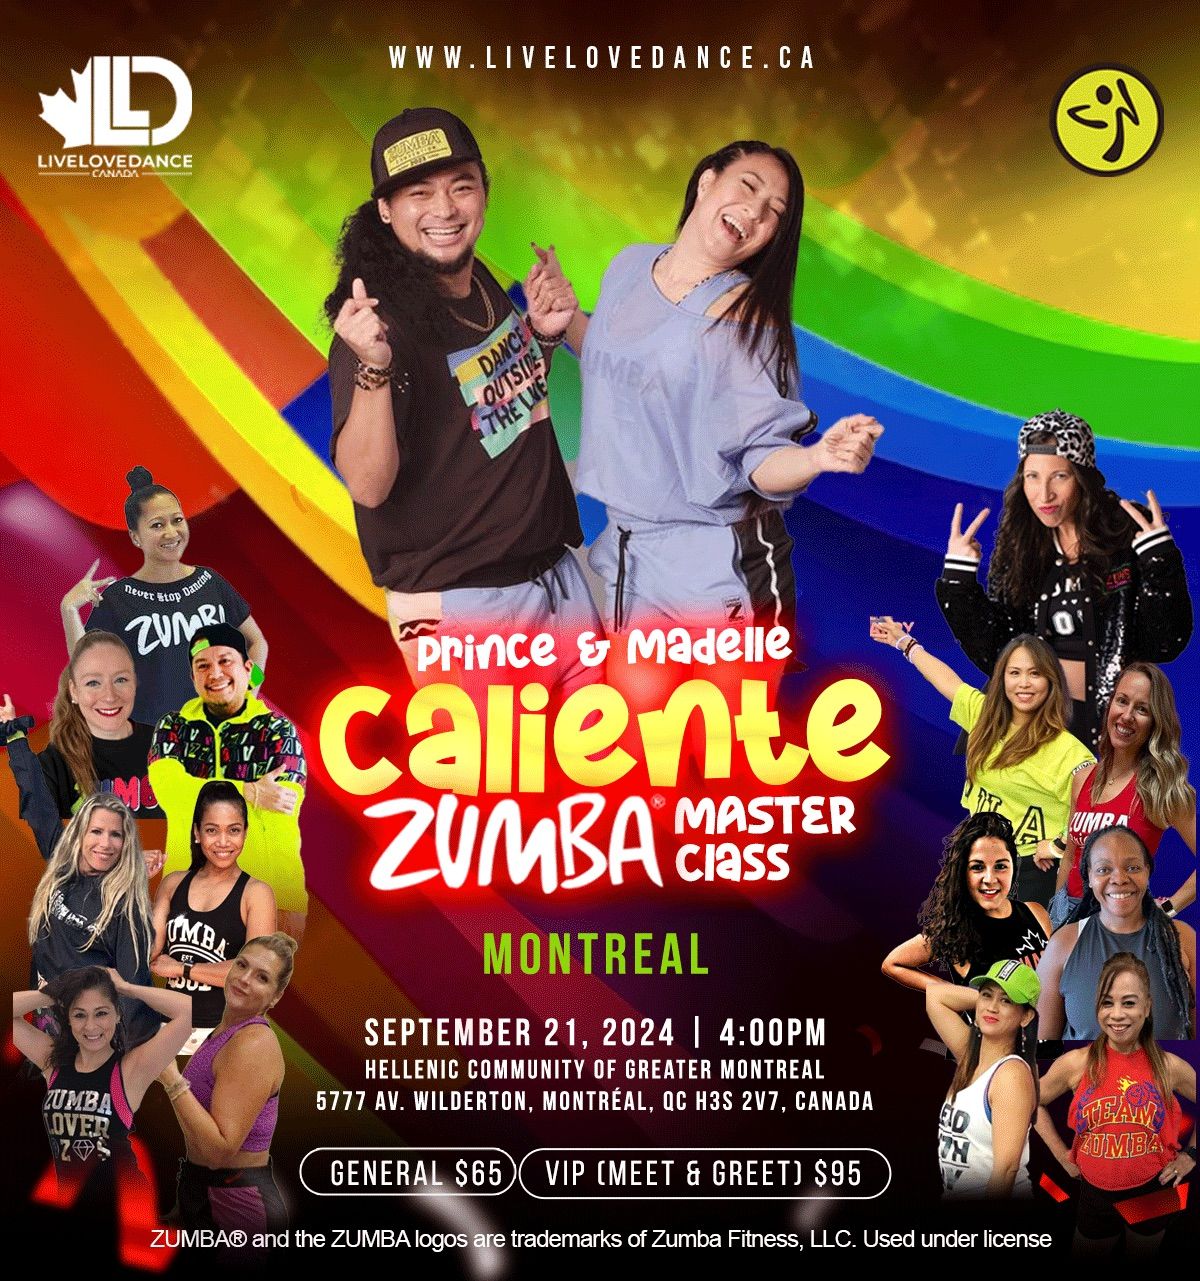 PRINCE & MADELLE | CALIENTE - Zumba Master Class | MONTREAL